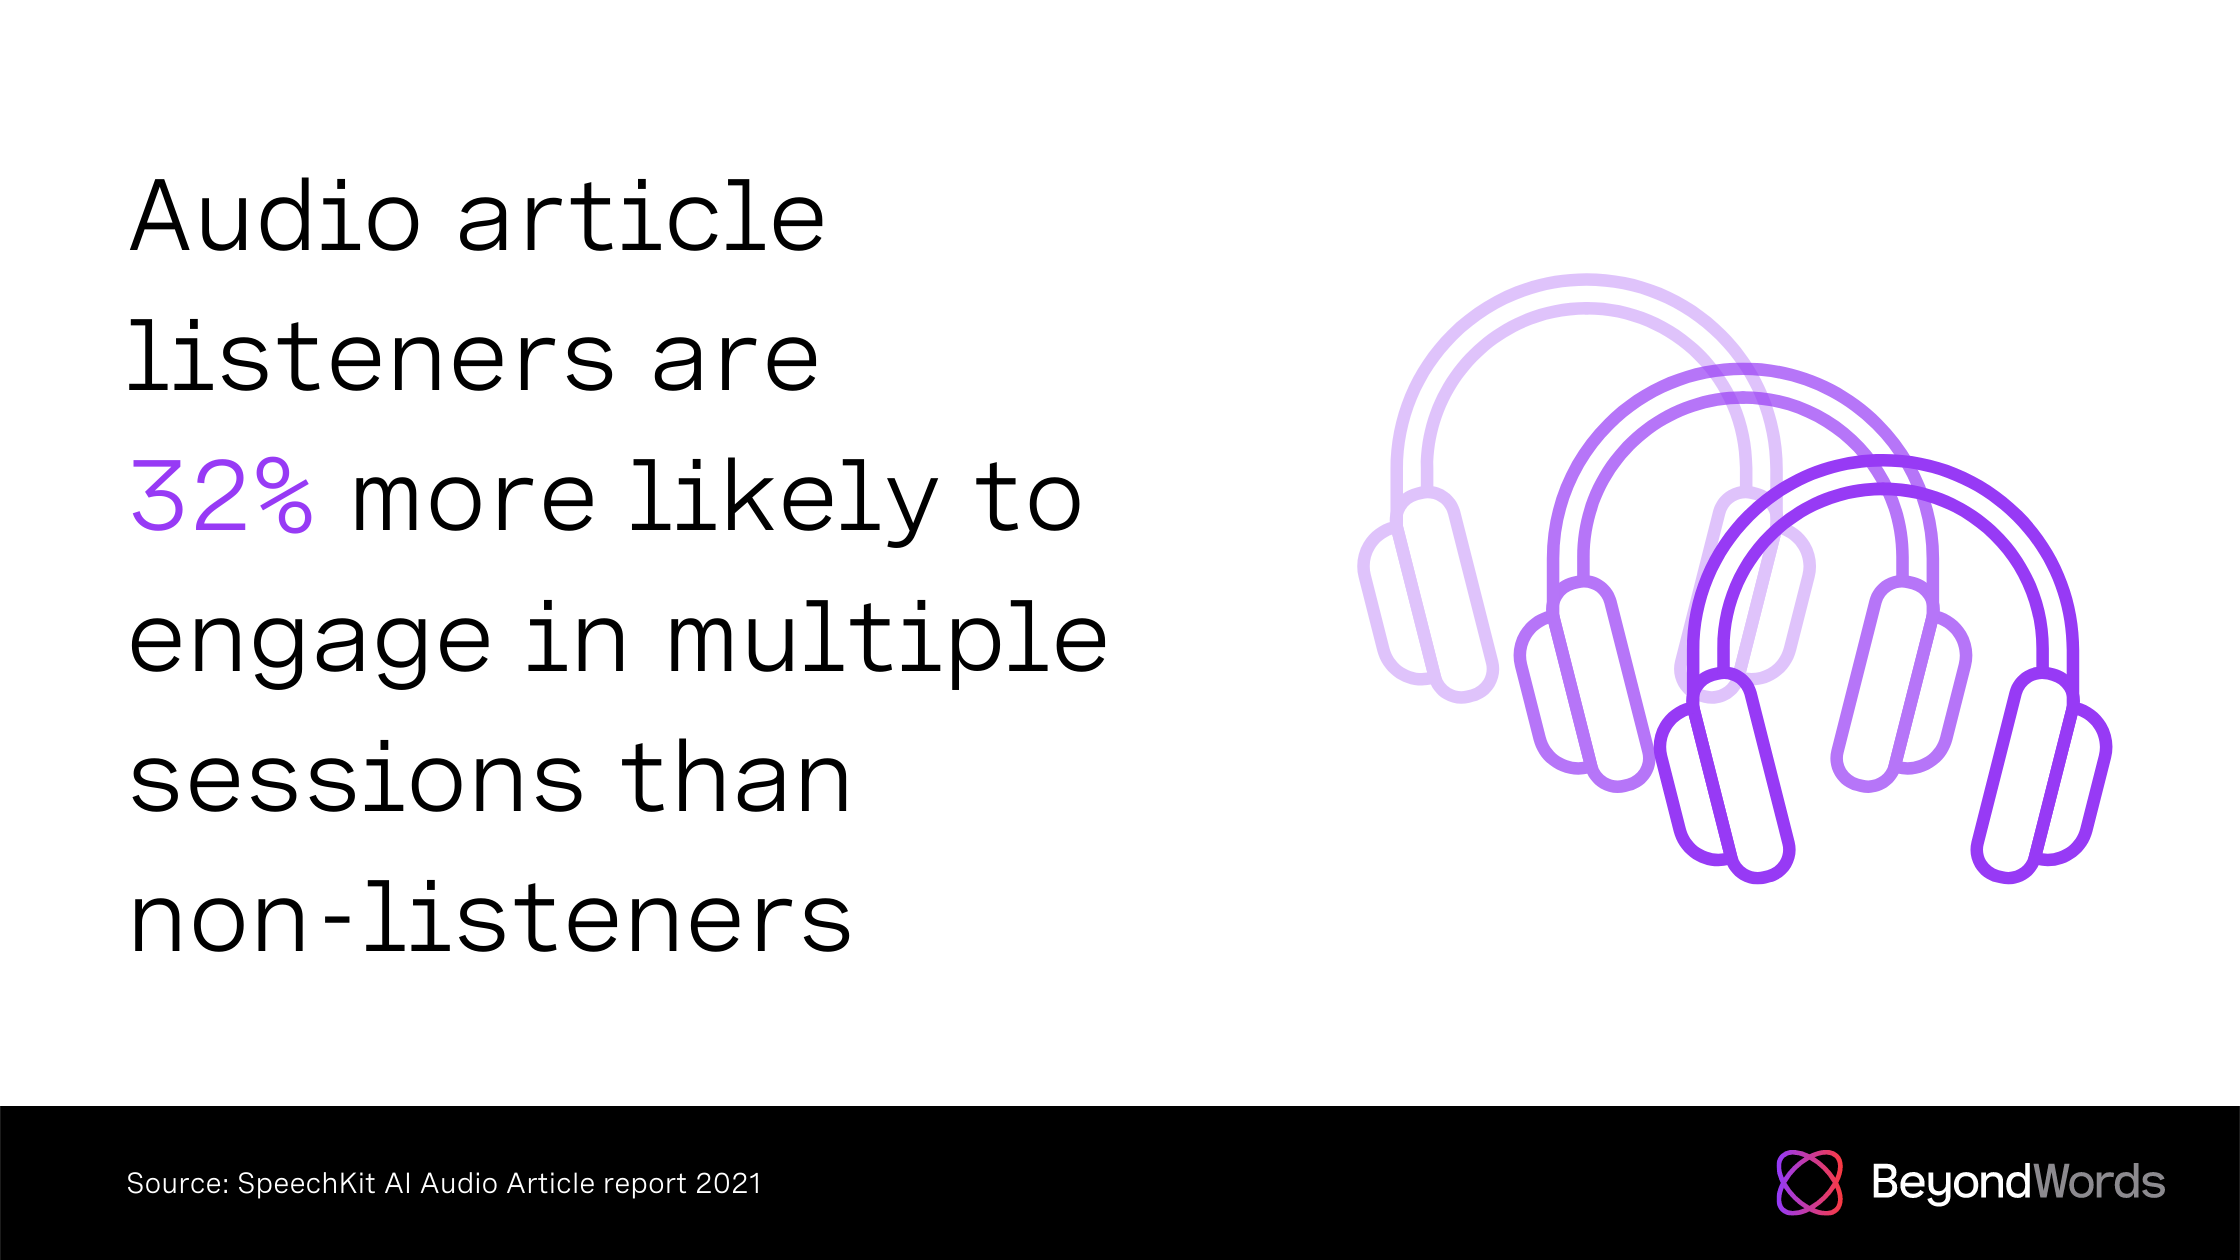 Audio article listeners are 32% more likely to engage in multiple sessions than non-listeners